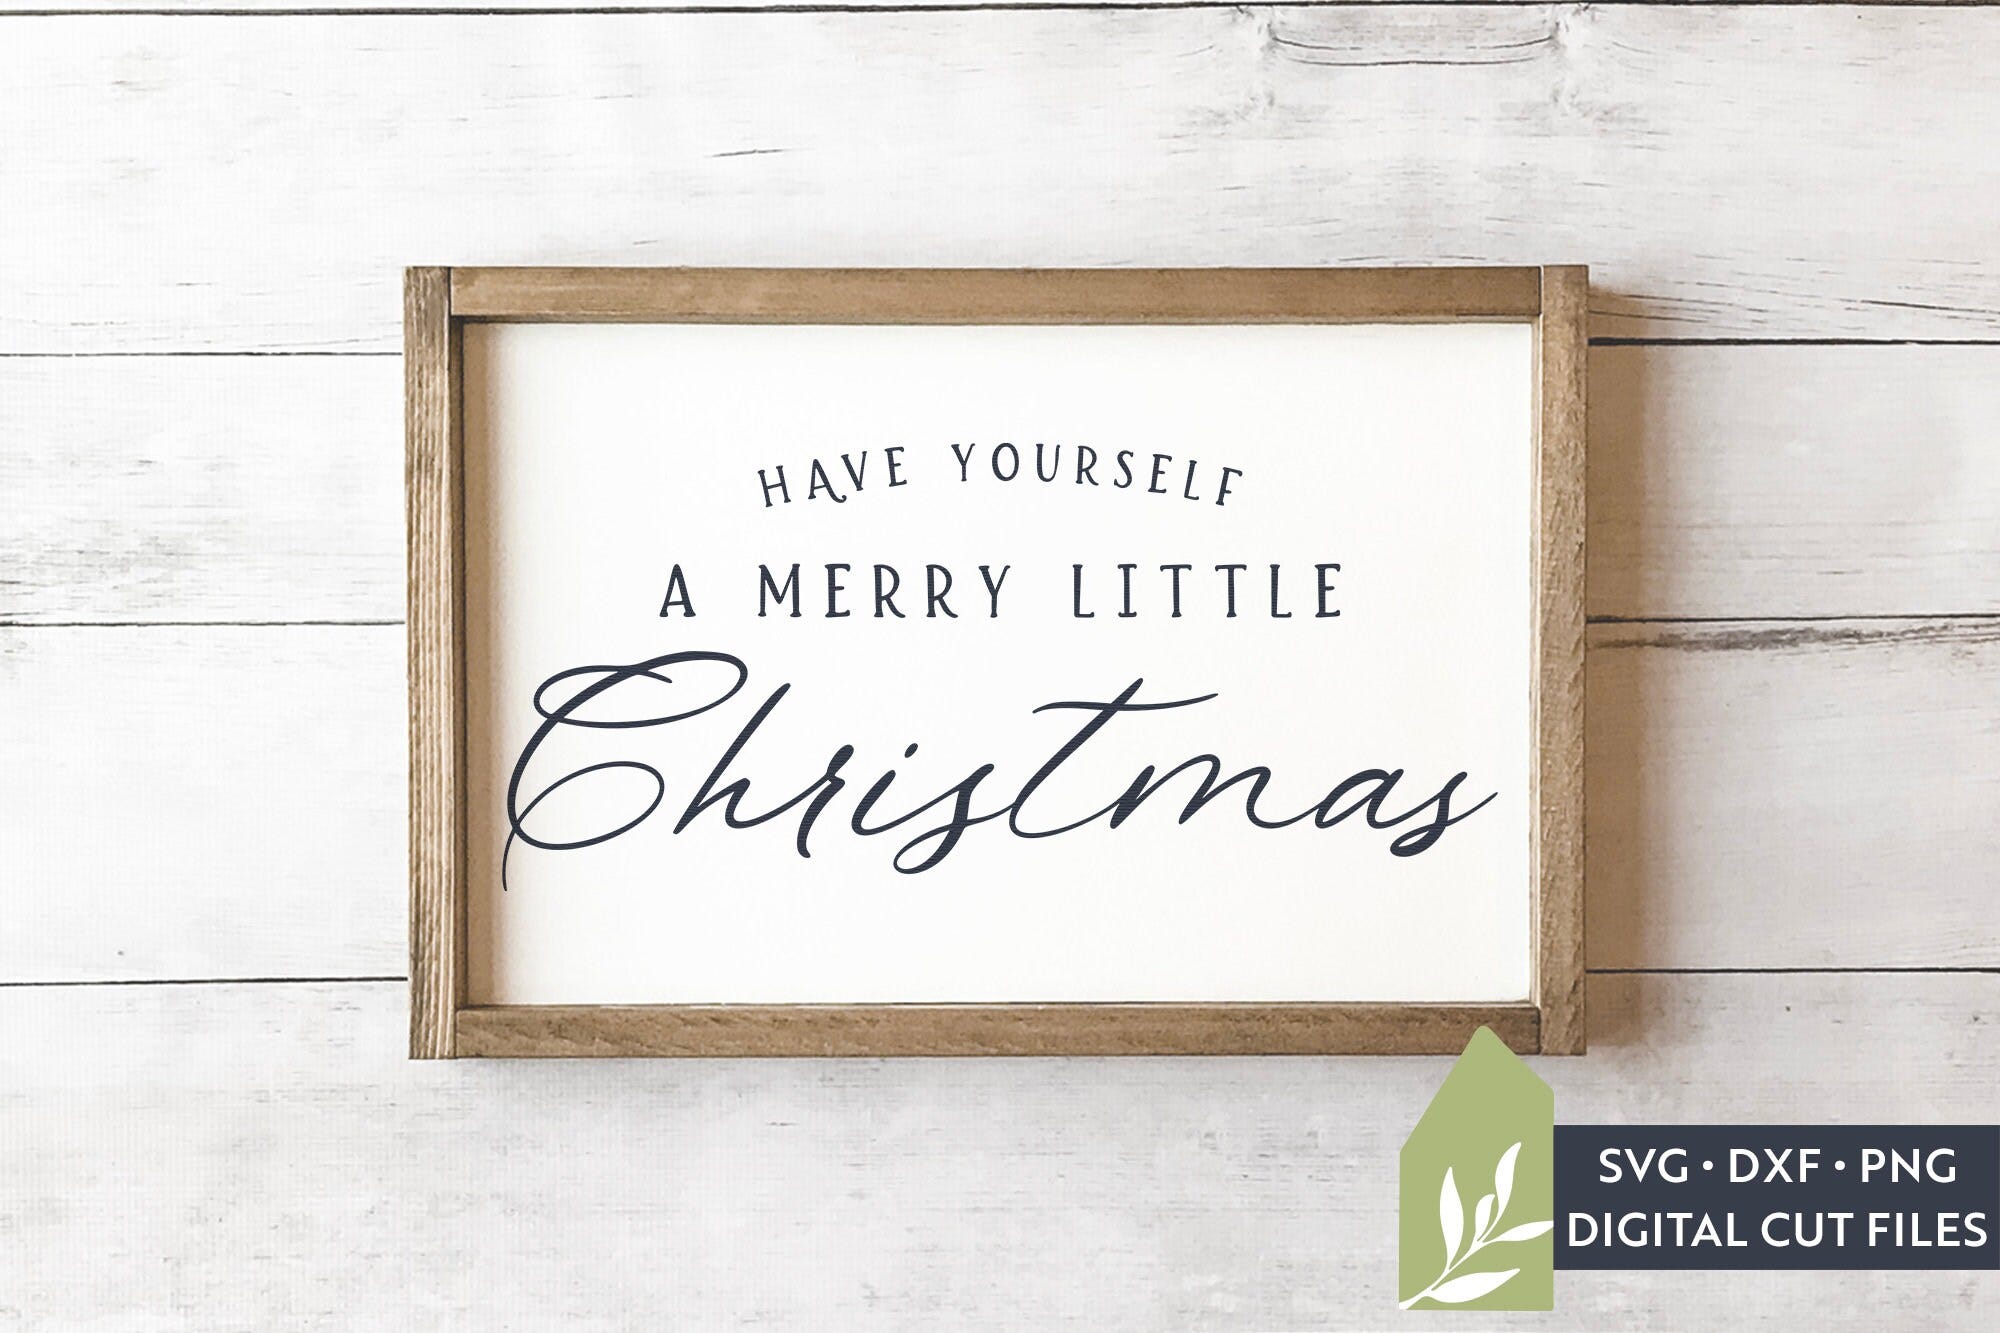 Christmas SVG Files, Have Yourself a Merry Little Christmas, Farmhouse SVG, Commercial Use, Digital Cut Files